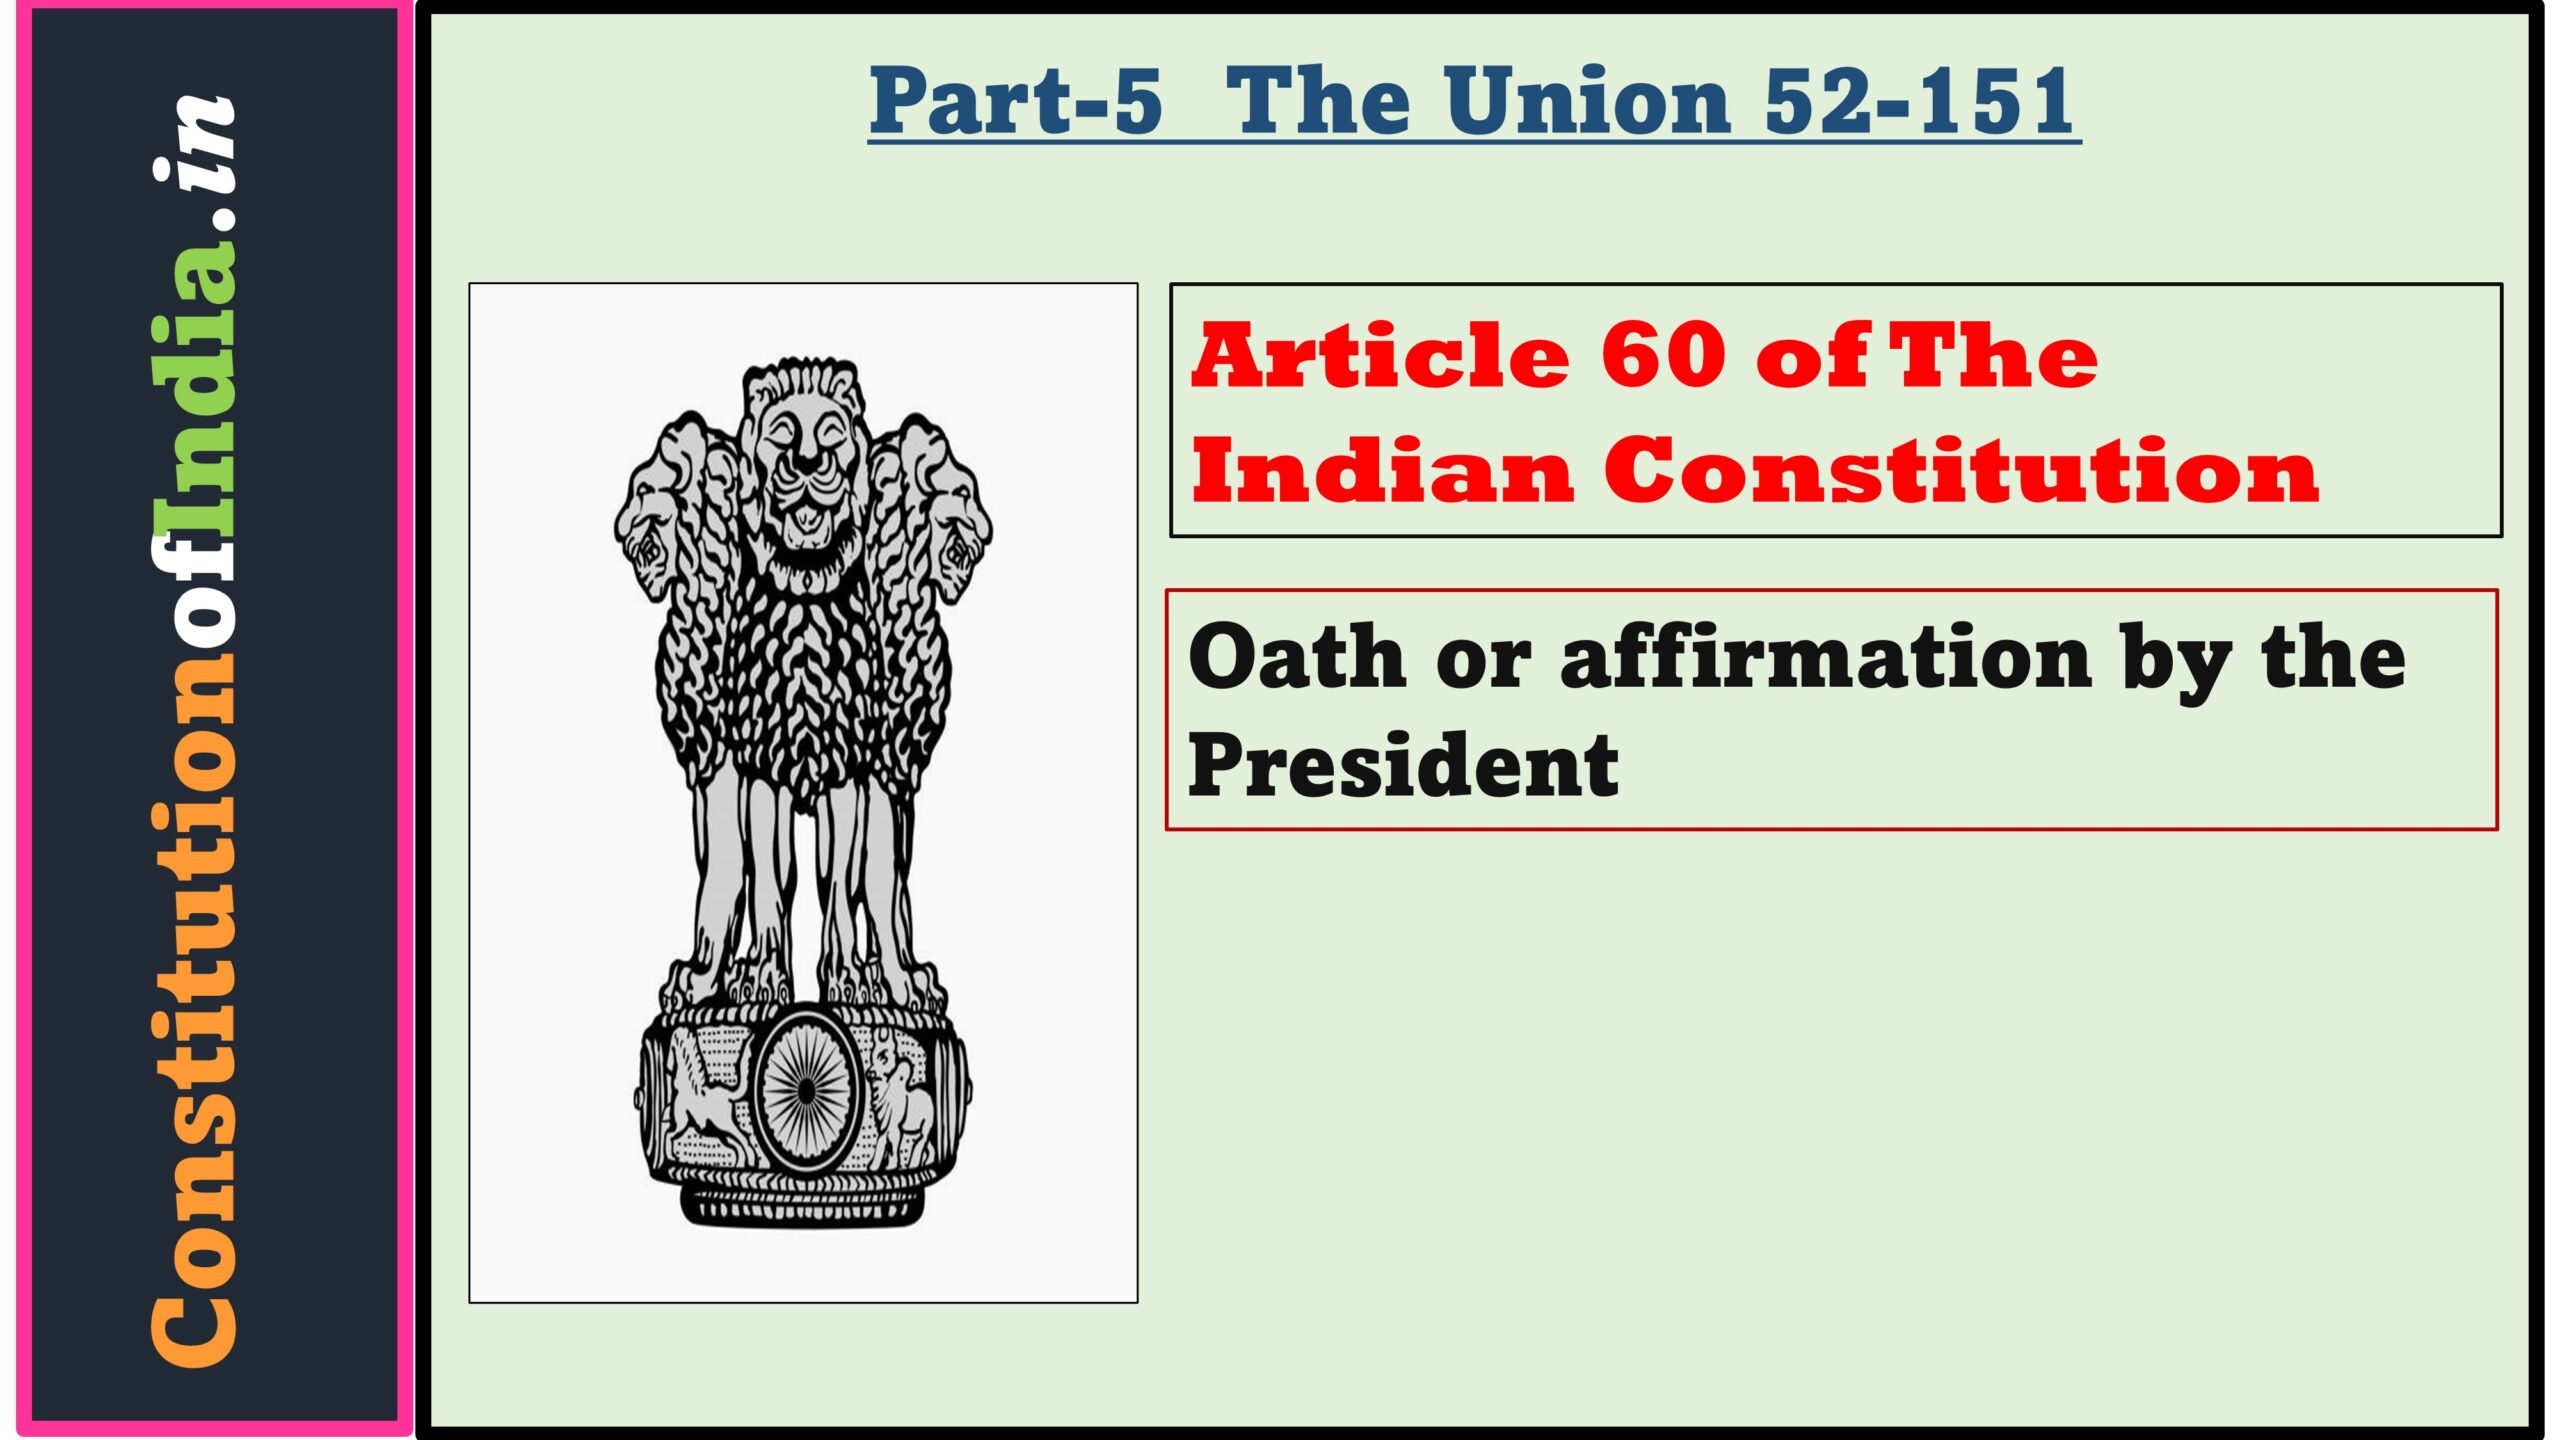 Article 60 of Indian Constitution